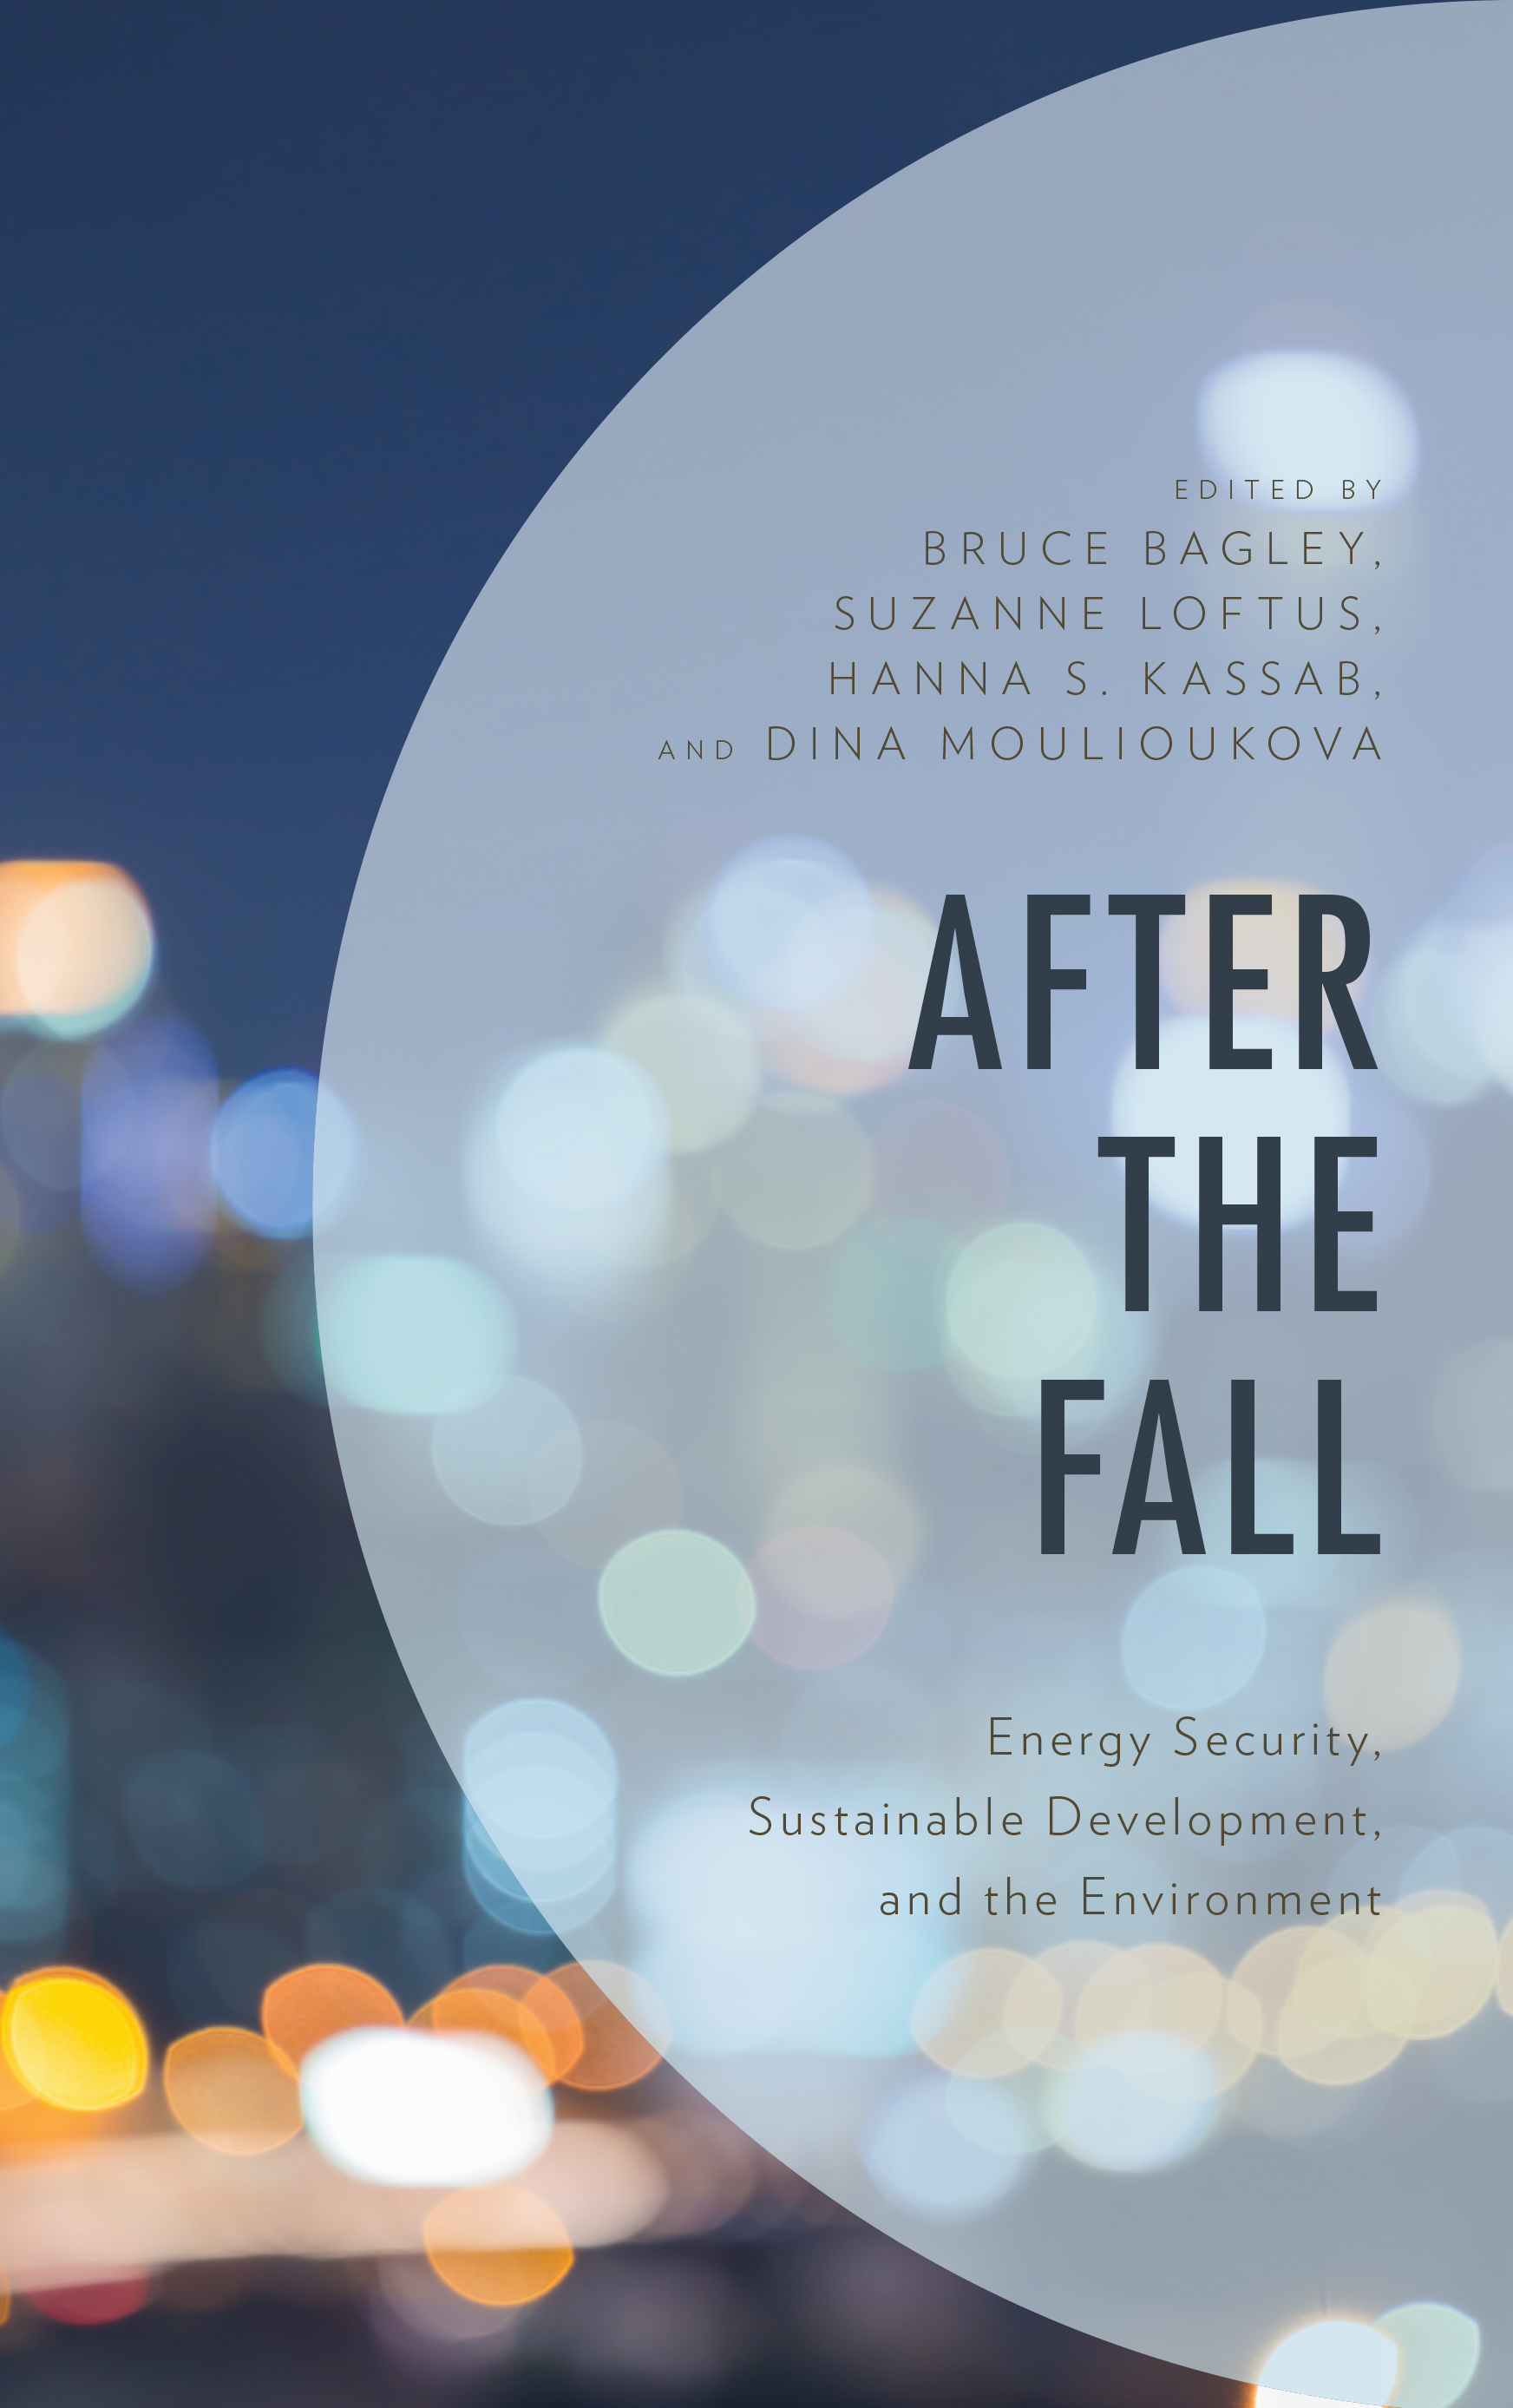 After the Fall: Energy Security, Sustainable Development, and the Environment